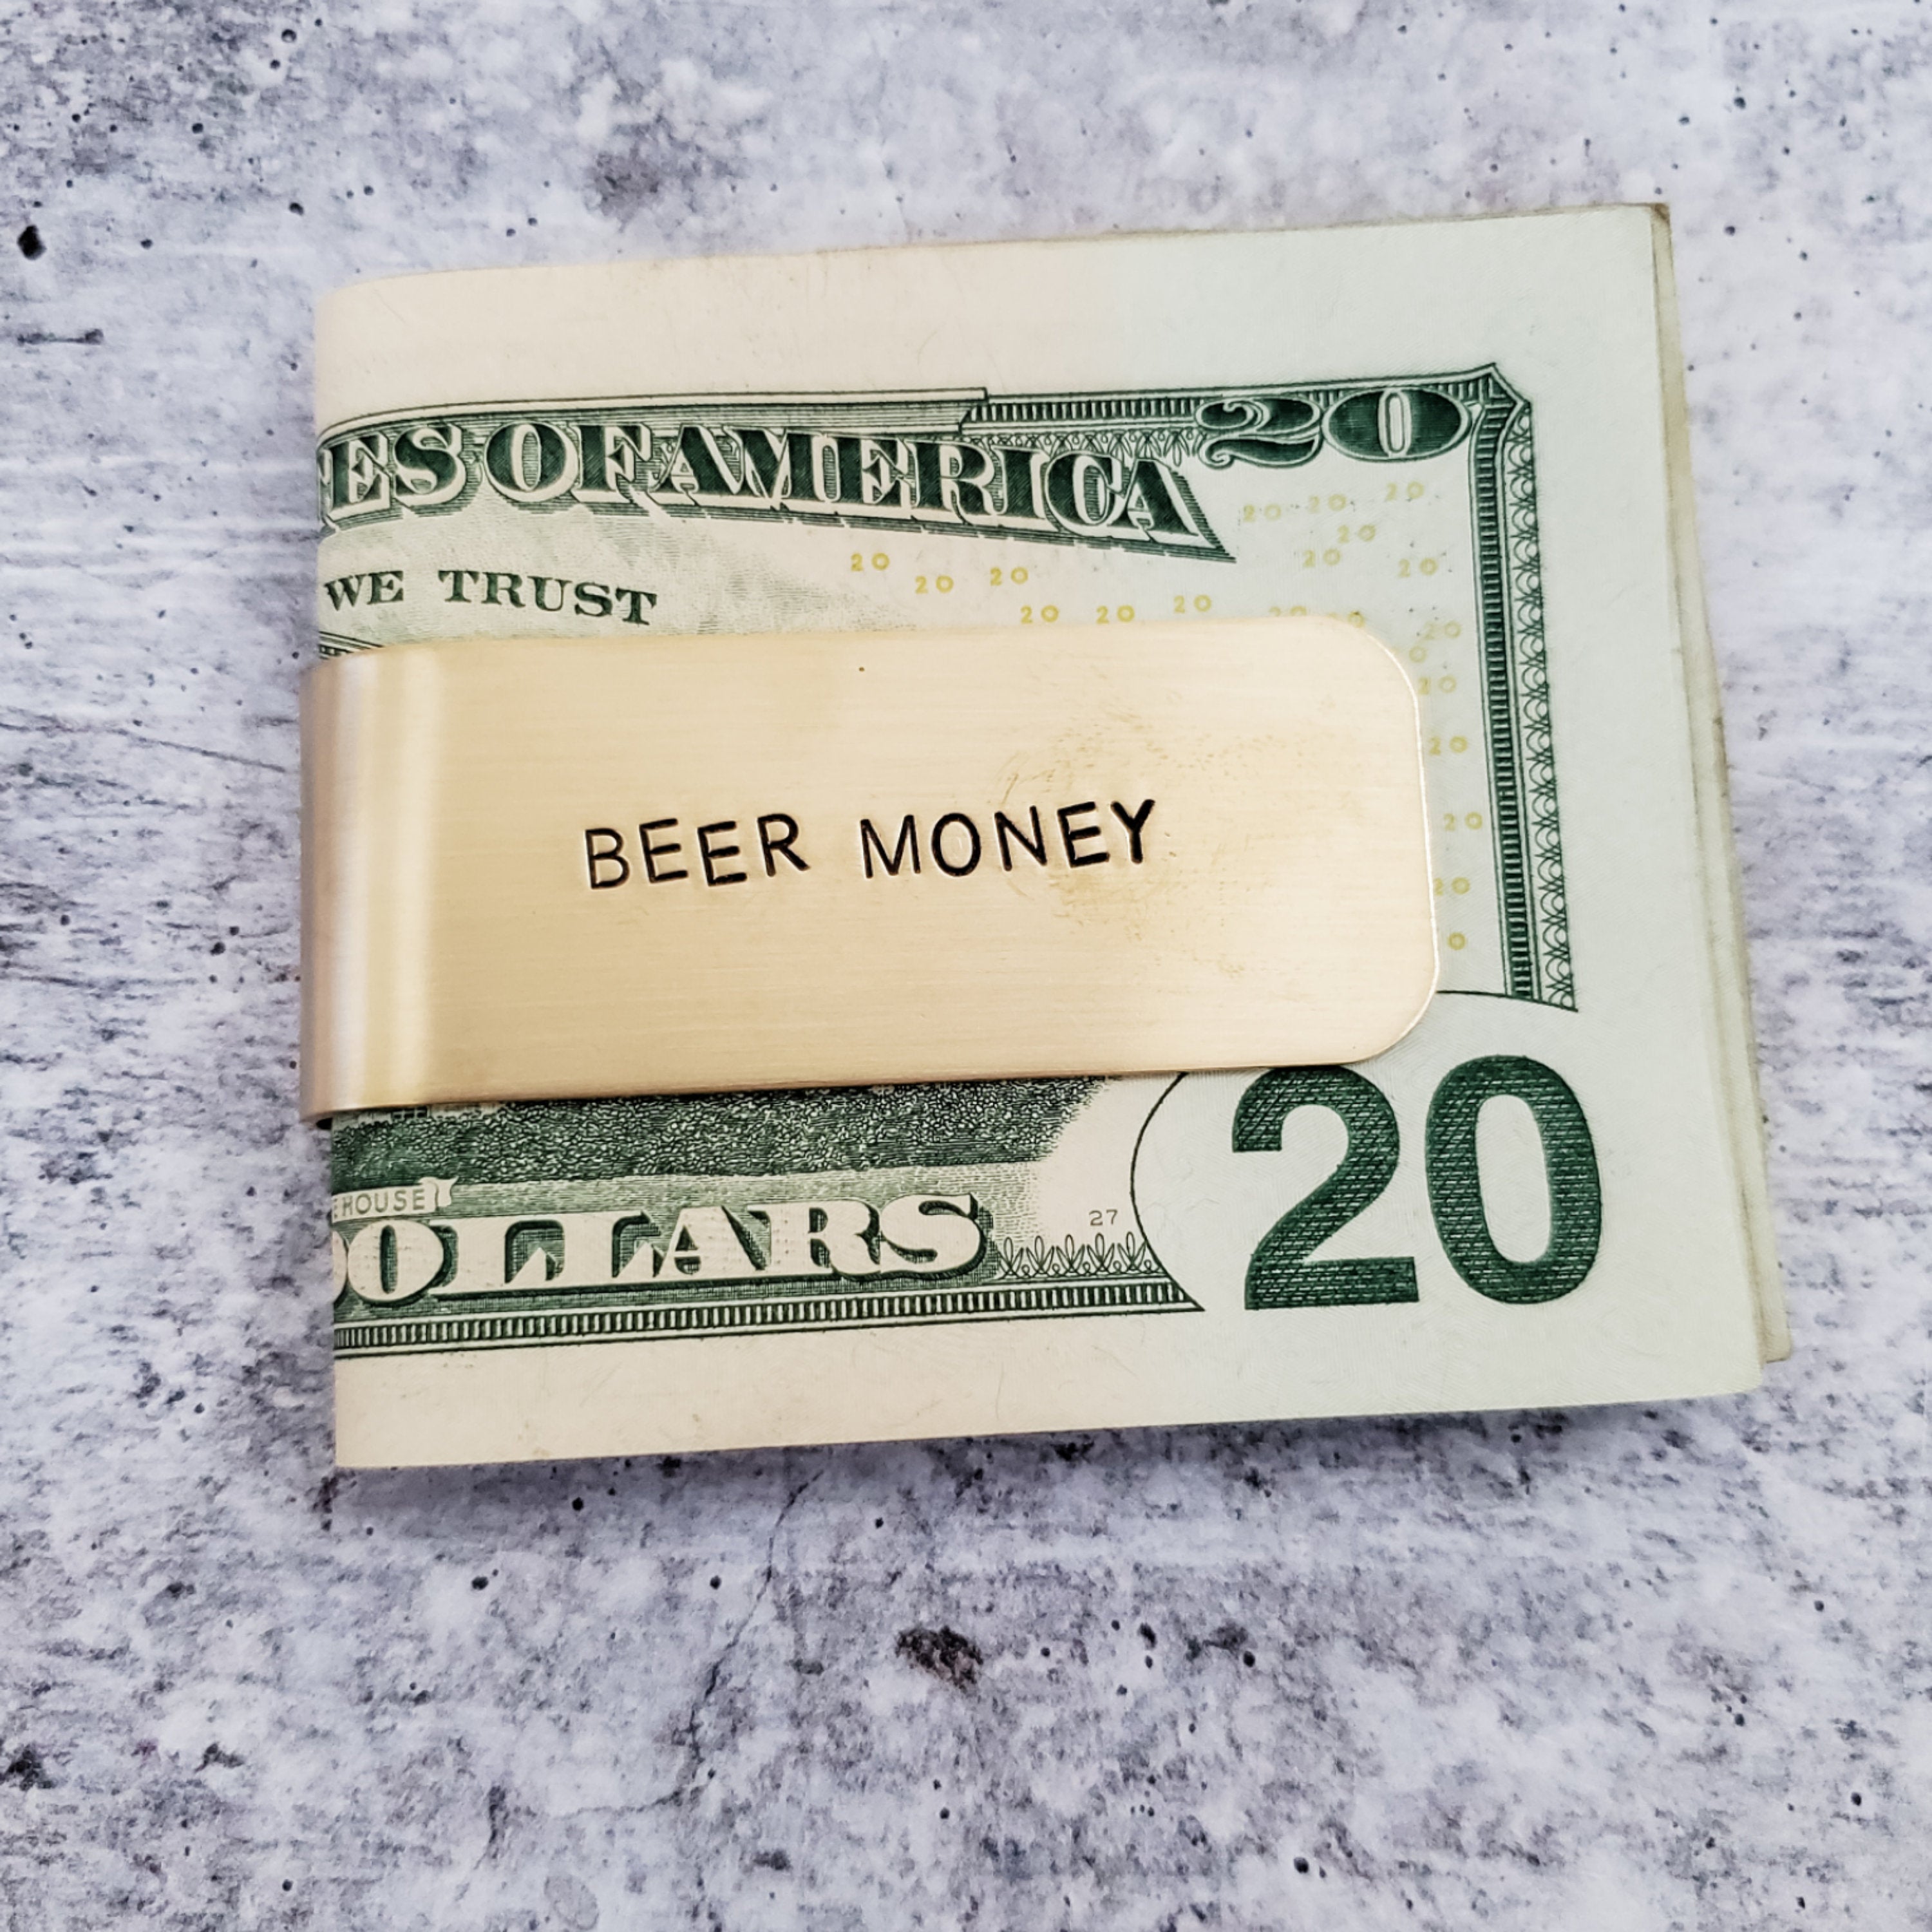 RAD DAD Money Clip - Custom Money Clip - Personalized Father's Day Gift - First Time Dad Gift - Custom Minimalist Wallet for Dads - Cool Dad